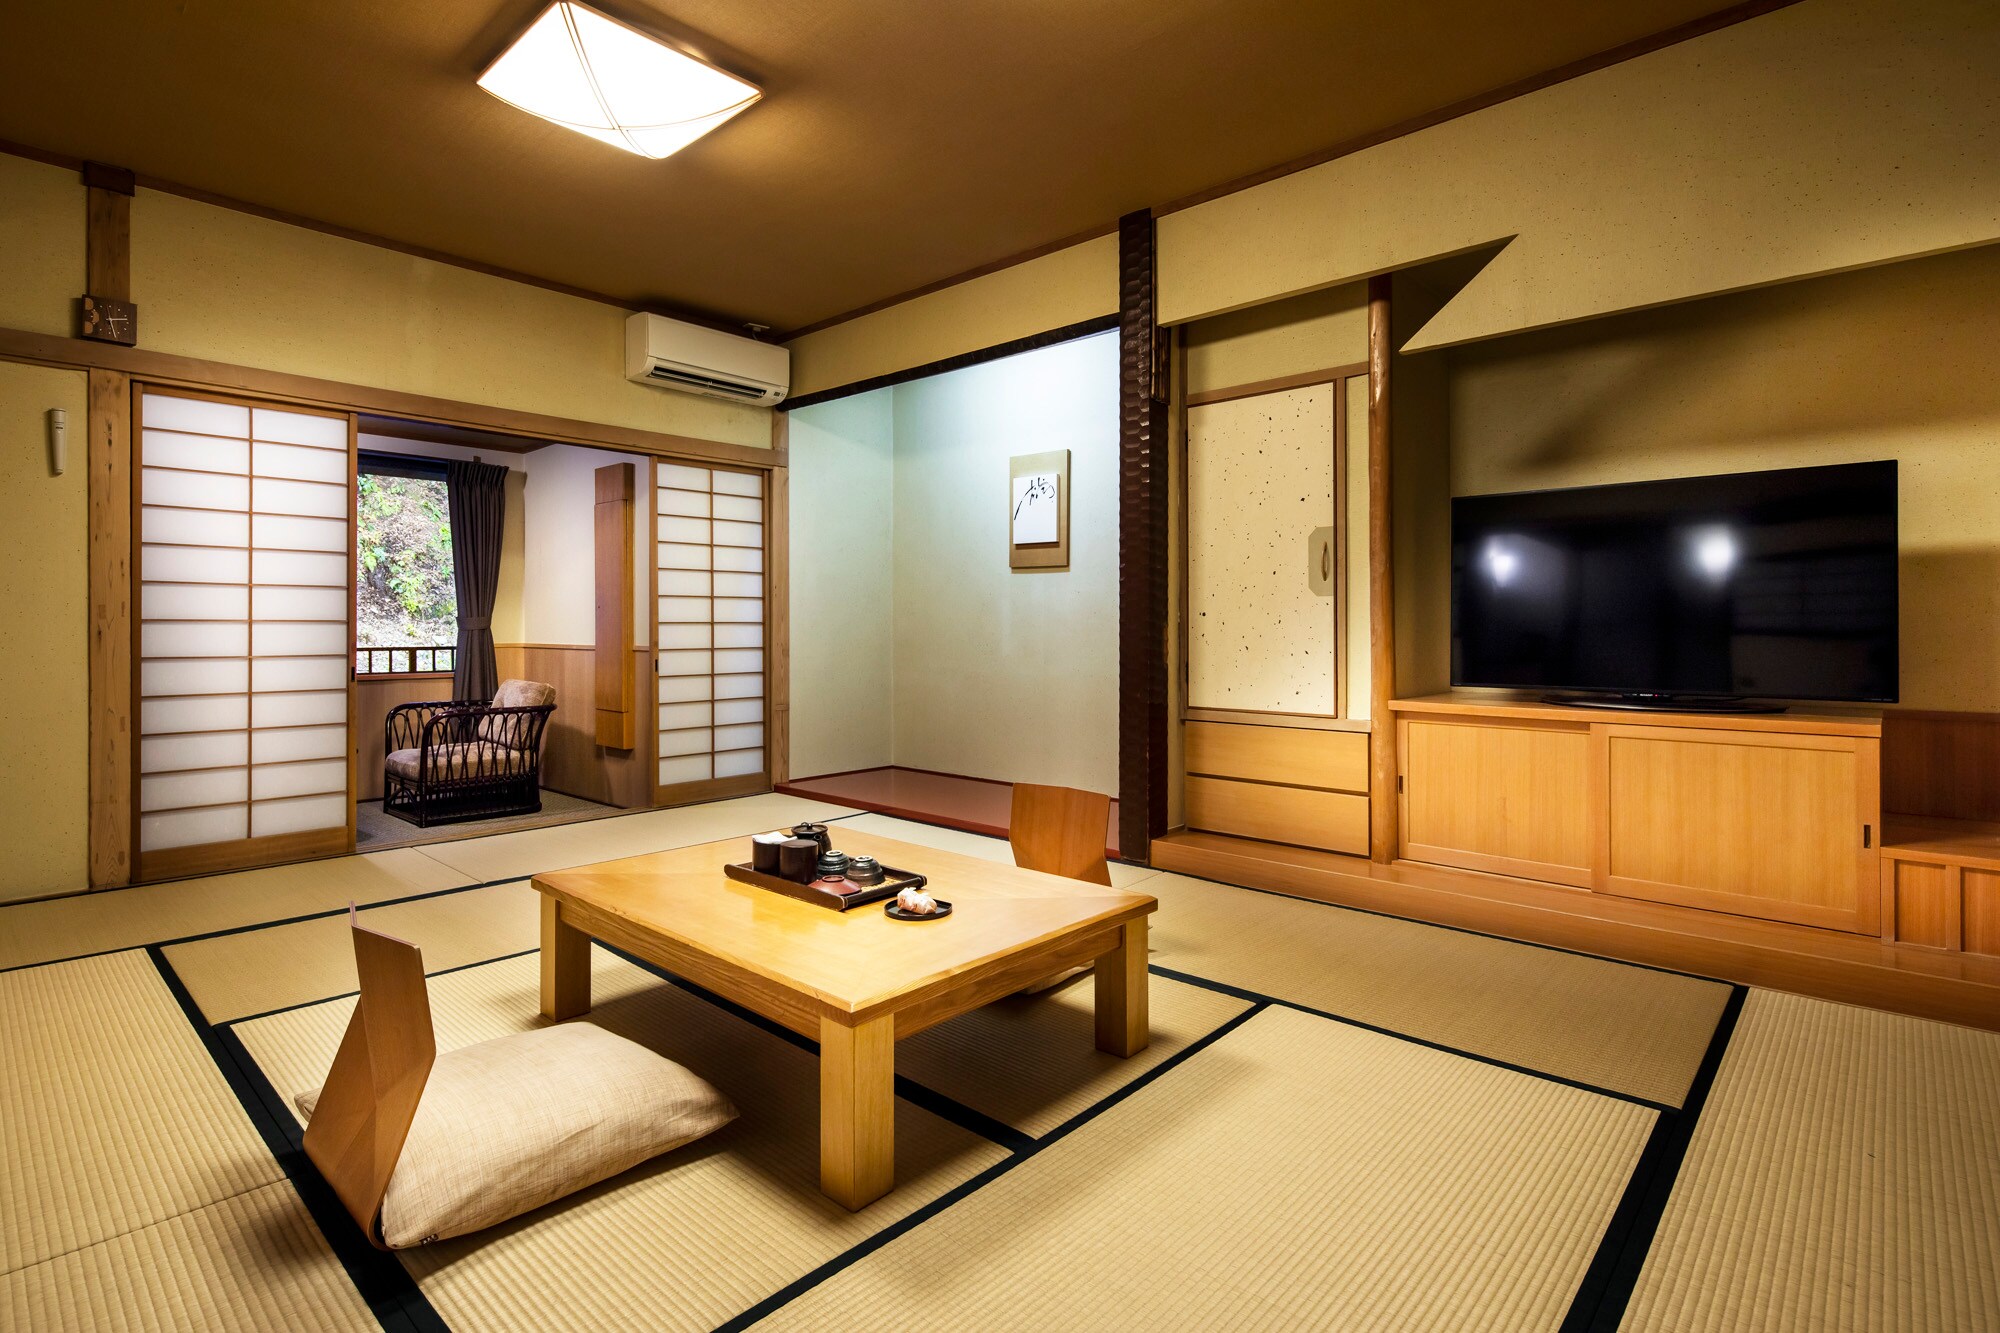 Open-air style Japanese style room with 12 tatami mats